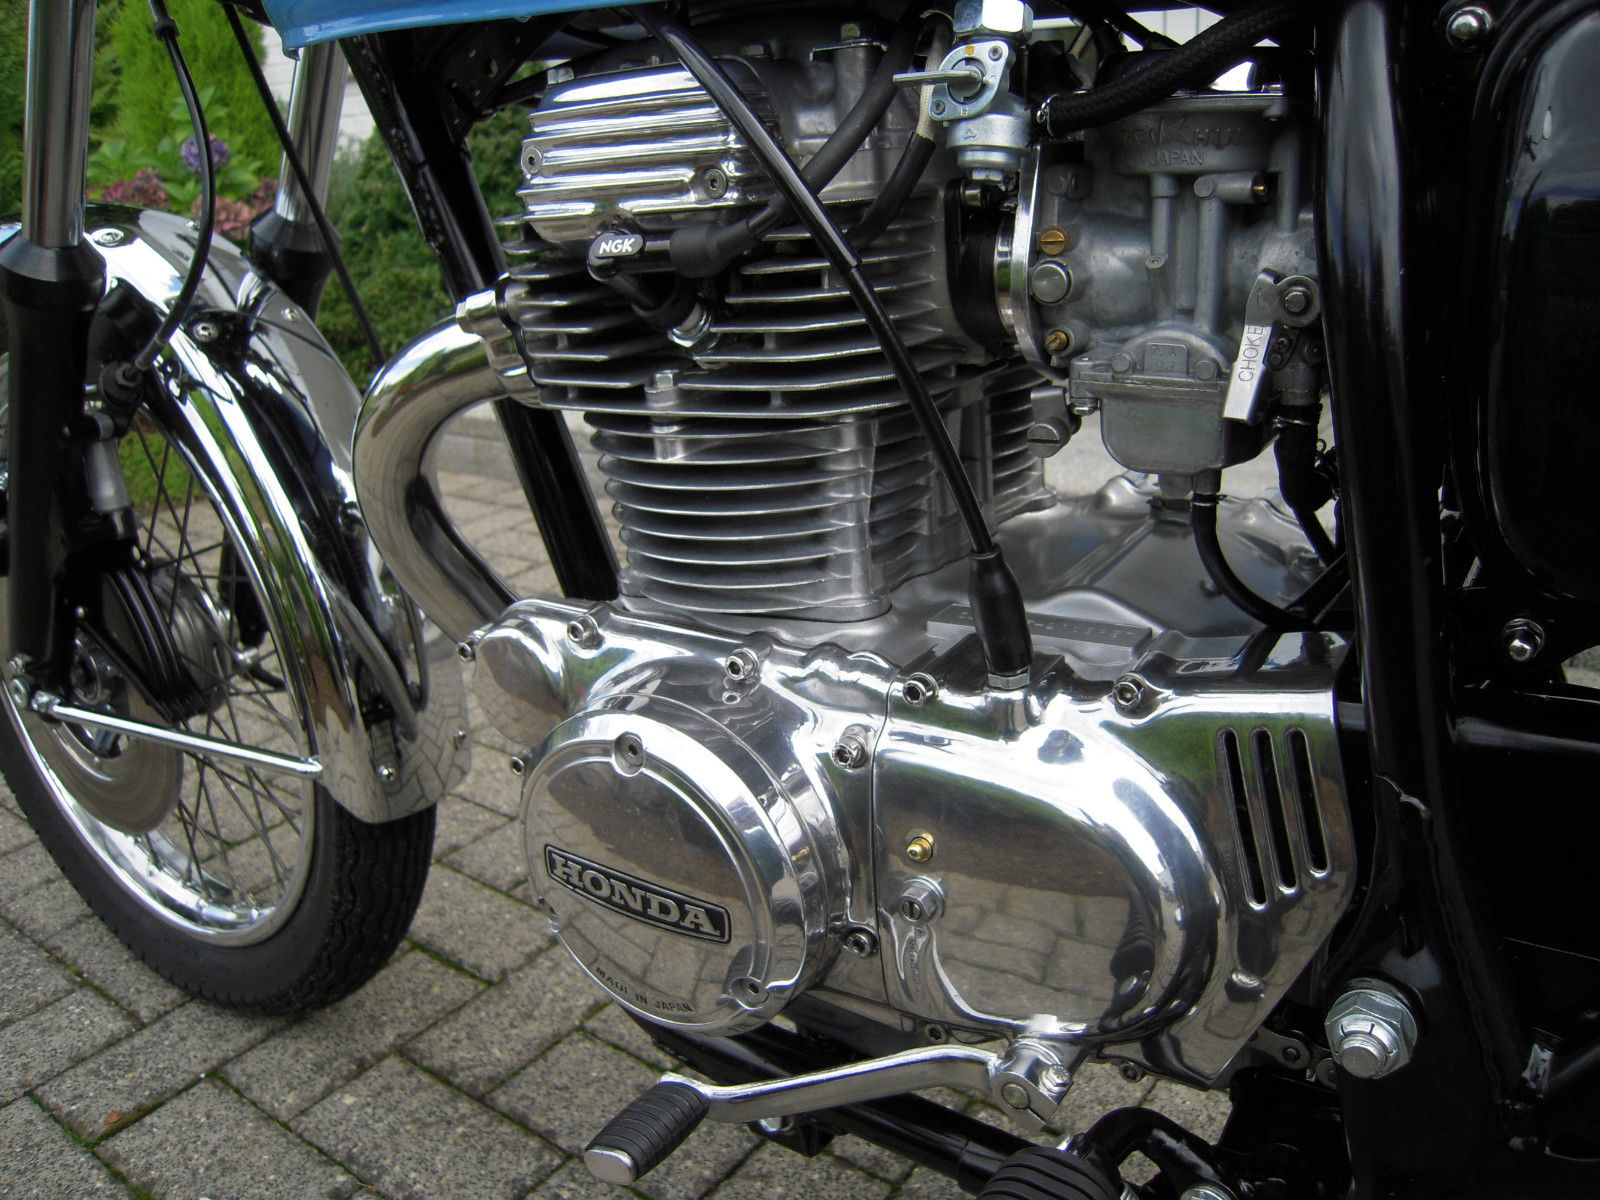 Honda CB360 - 1979 - Motor and Transmission, Polished Engine Cases, Gear Lever and Clutch Cable.